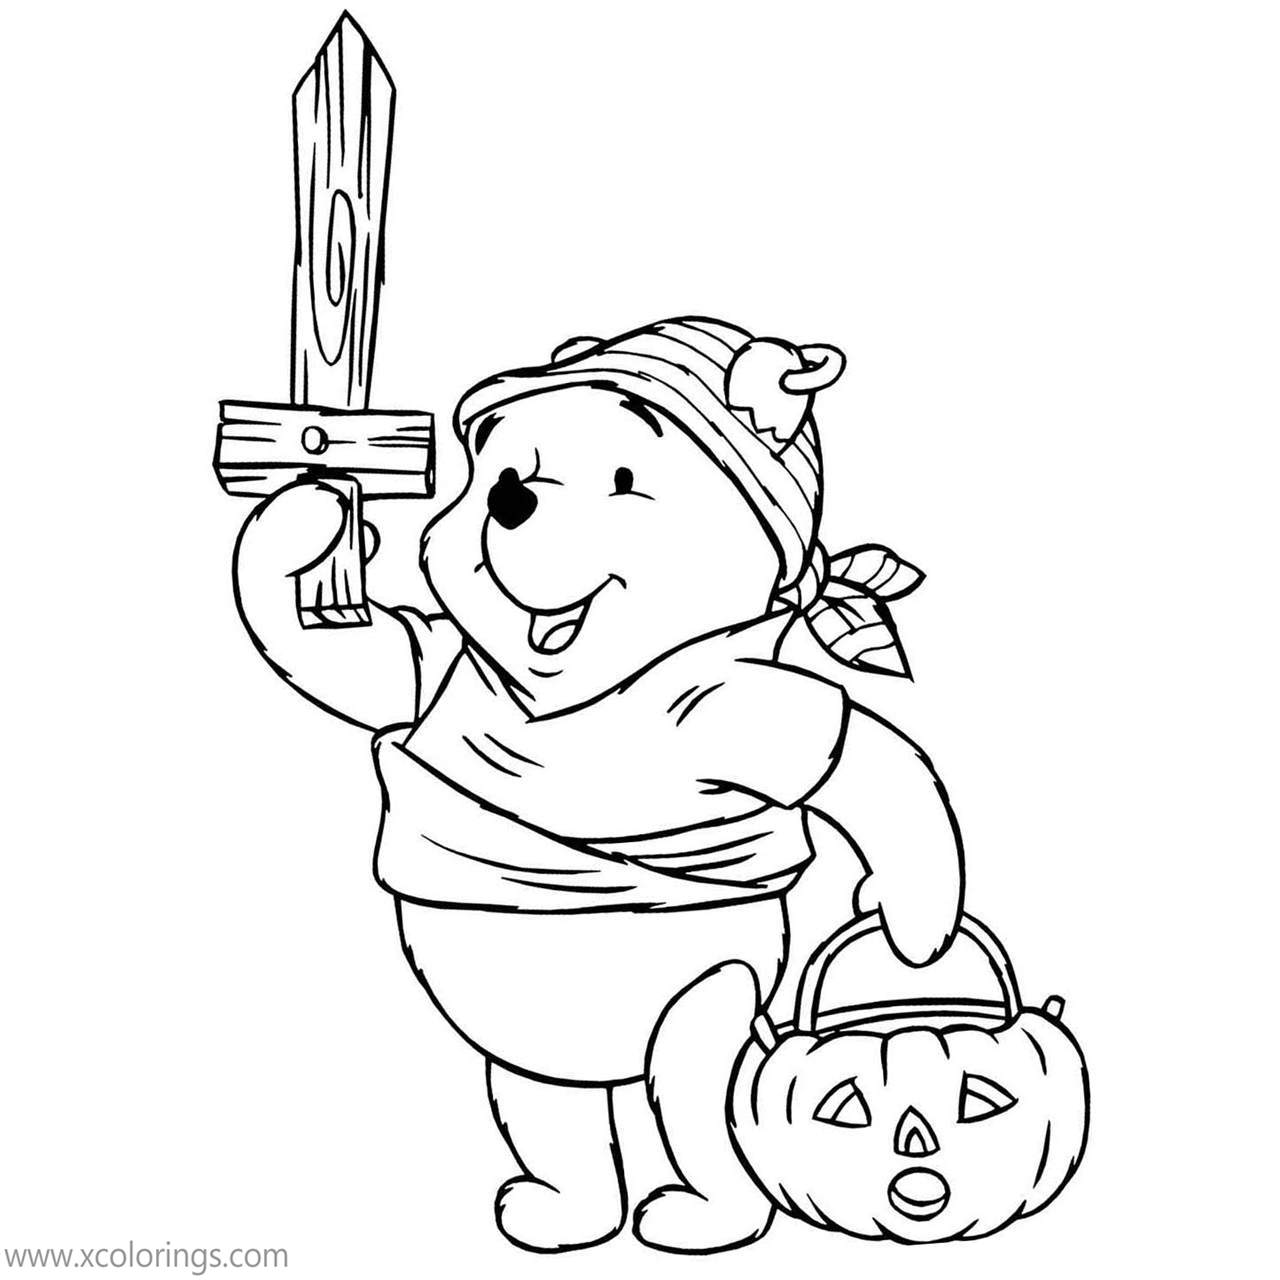 Free Winnie the Pooh Halloween Viking Coloring Pages printable